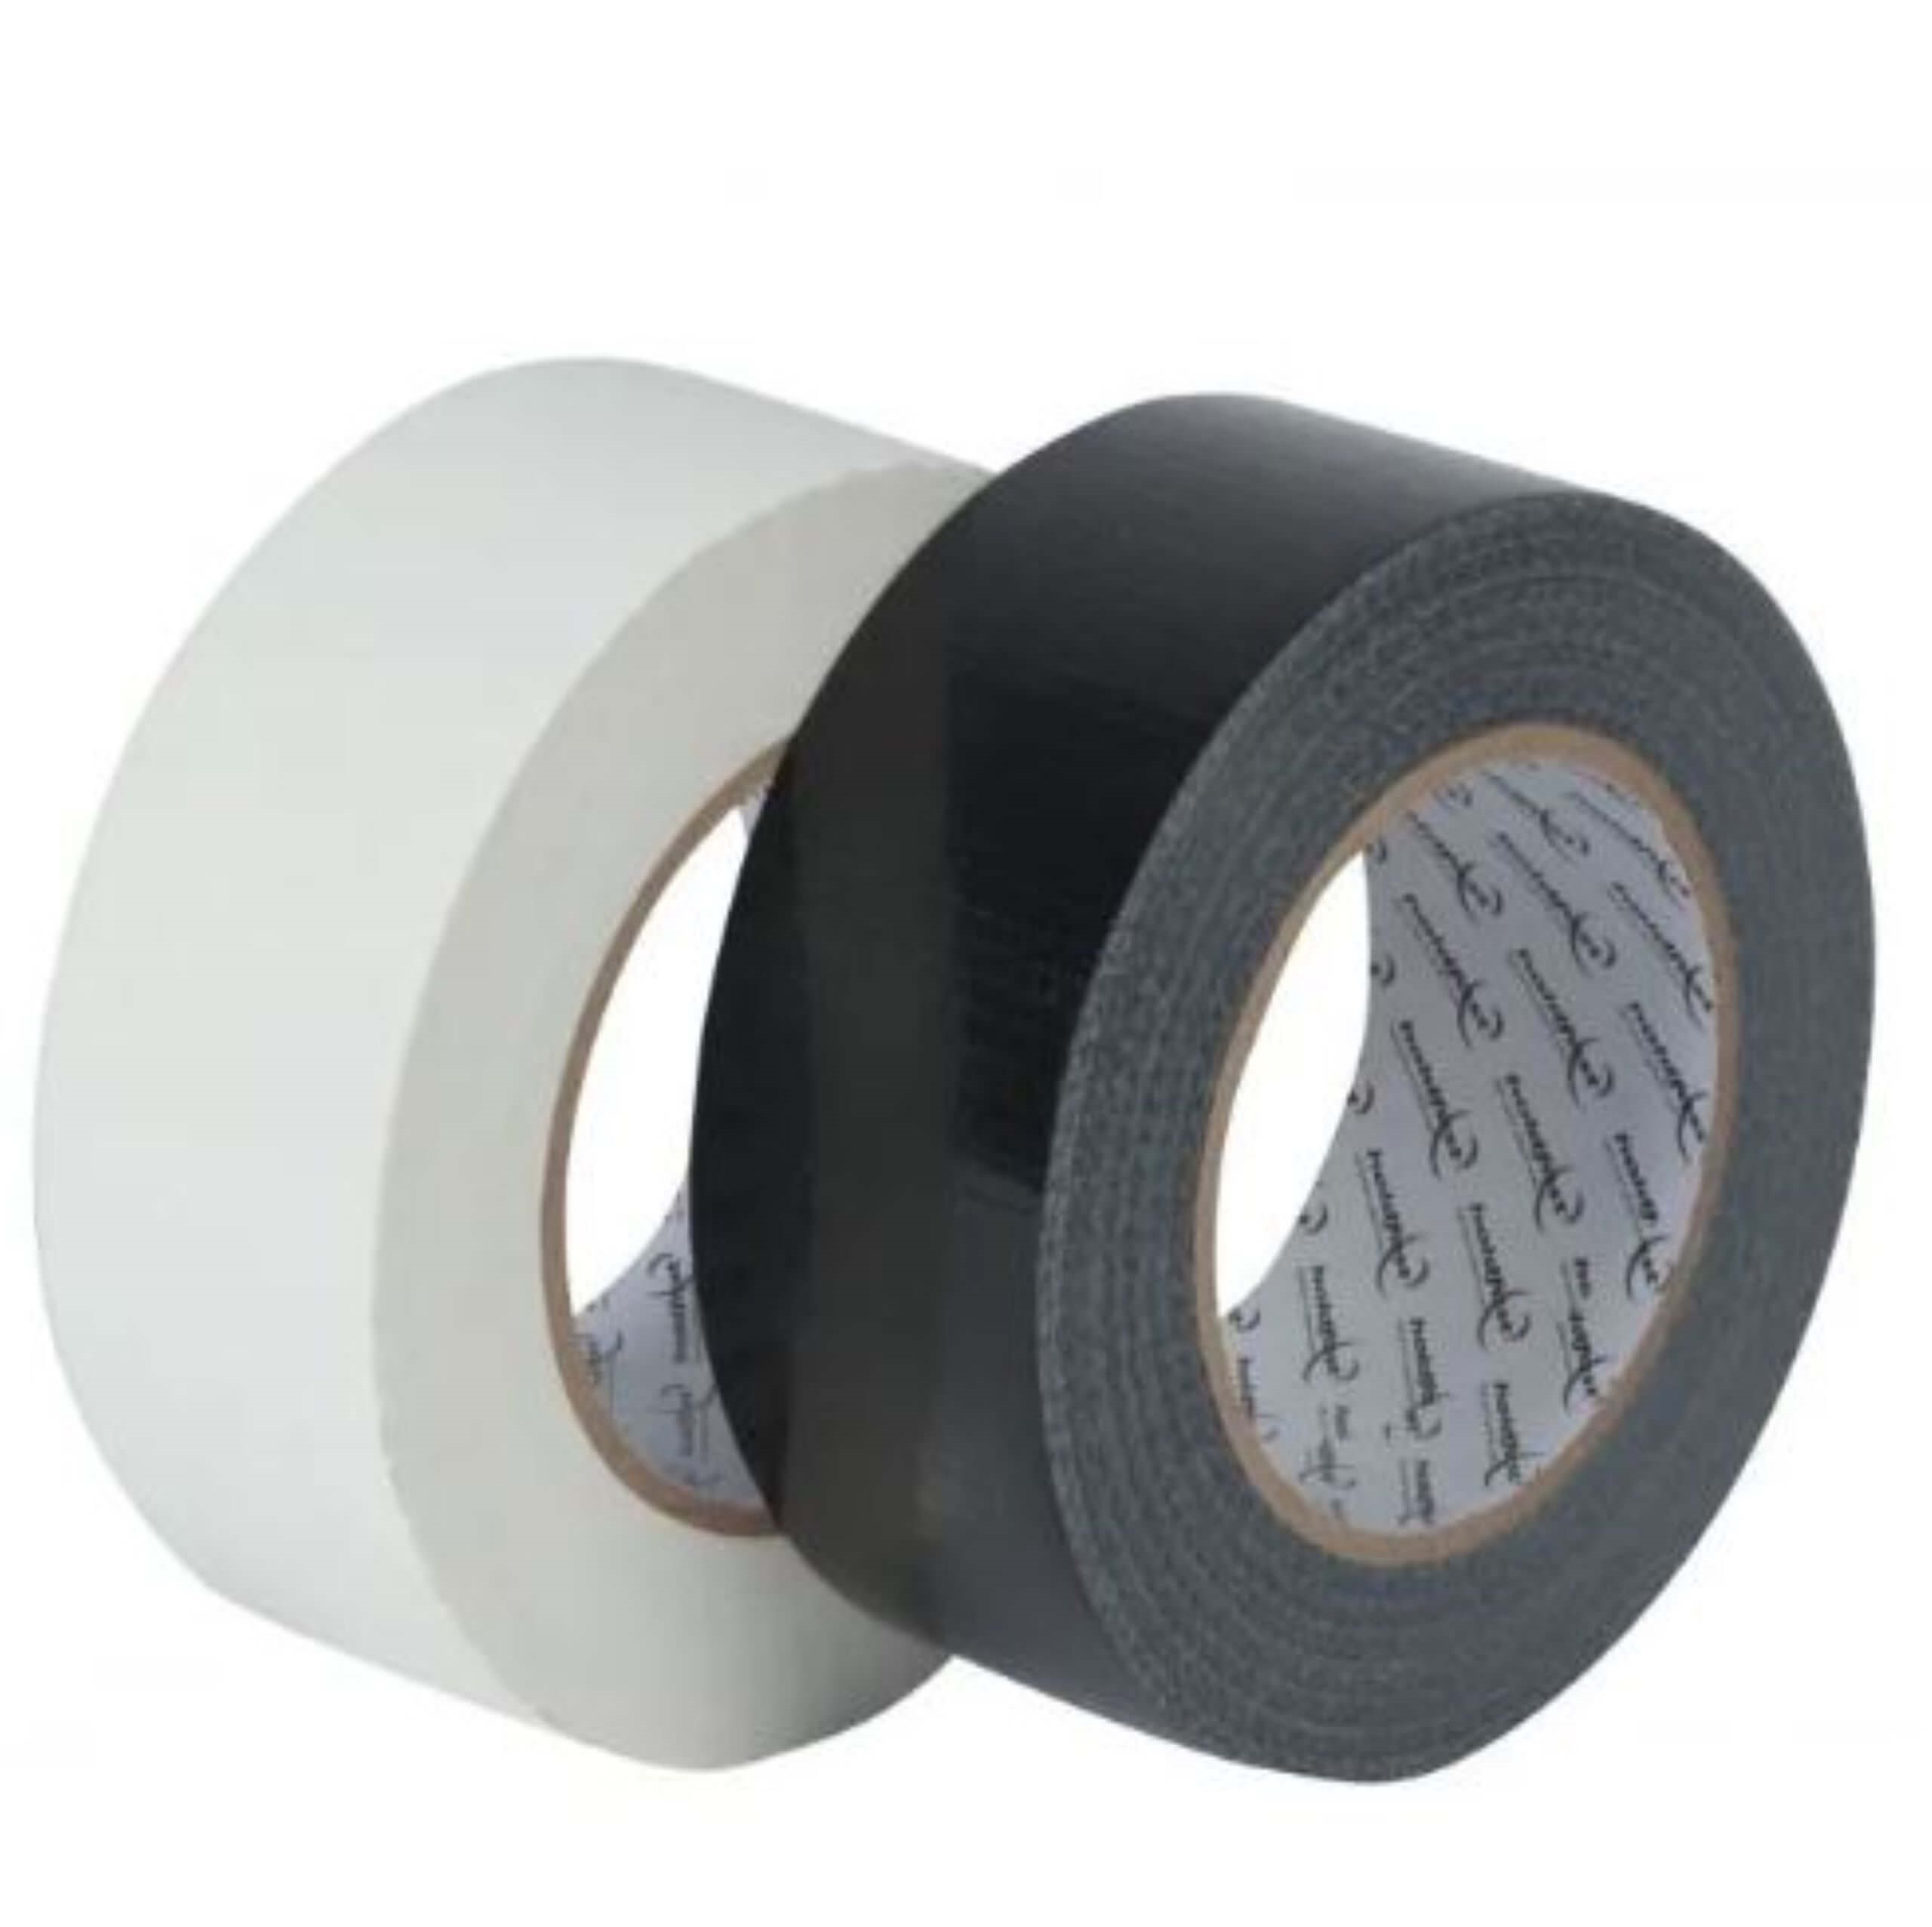 An image of cloth duct tape.